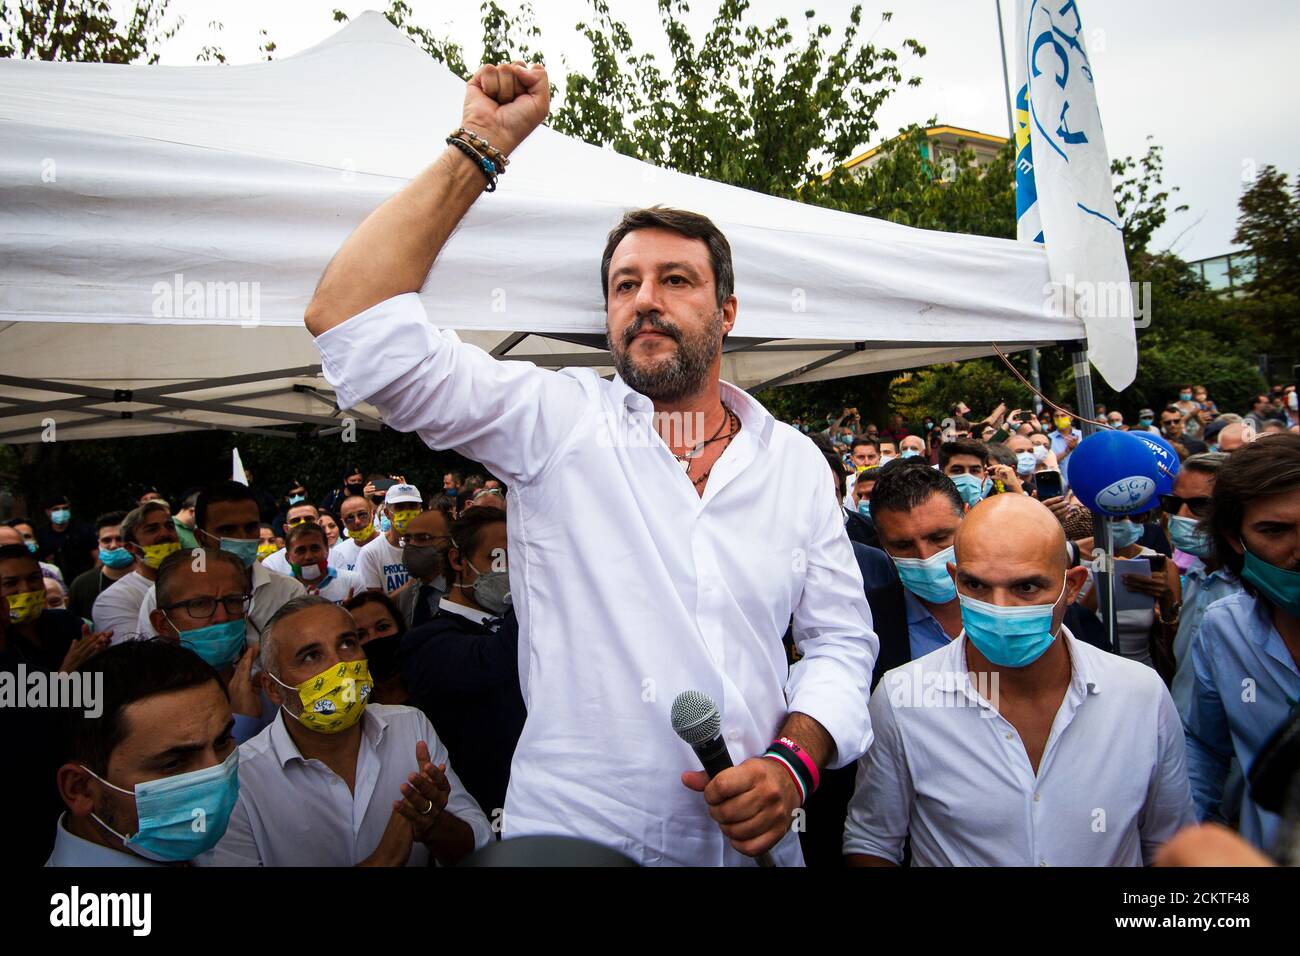 Venaria Reale, Italy - 16 September, 2020: Head of the League party Matteo Salvini gestures as he delivers a speech during a election rally. On 20 and 21 September Italians will vote for a referendum to confirm the cut in the number of parliamentarians. On the same days, administrative elections are scheduled in 1184 municipalities and in 7 regions. Credit: Nicolò Campo/Alamy Live News Stock Photo